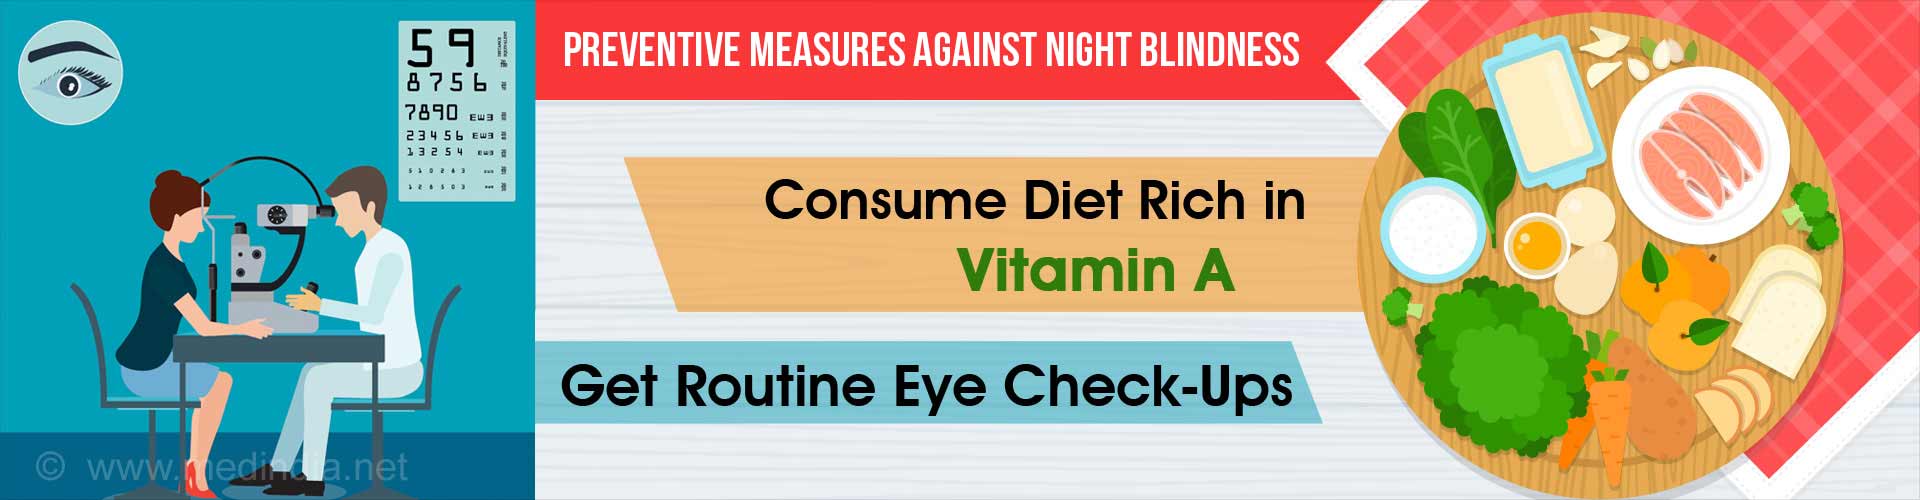 What are the symptoms of night blindness?